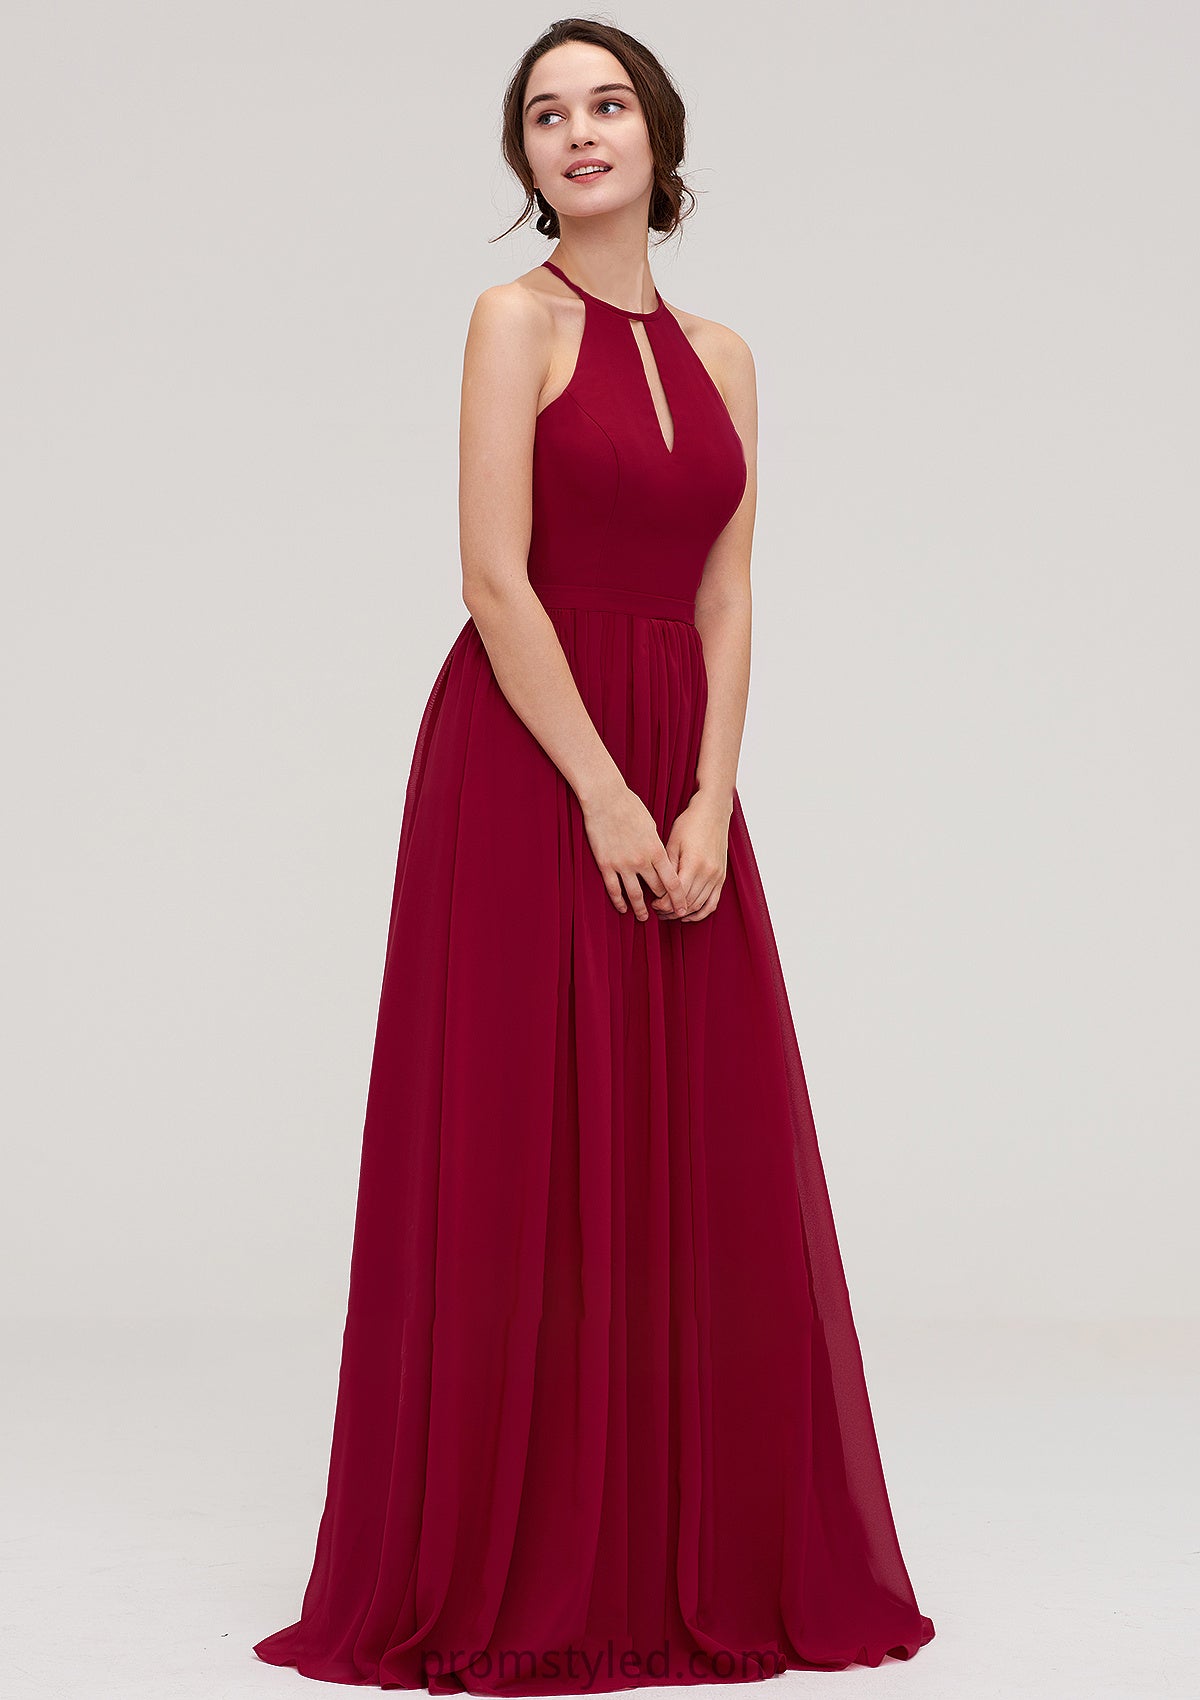 Scoop Neck Sleeveless A-line/Princess Long/Floor-Length Chiffon Bridesmaid Dresseses With Pleated Tori HLP0025456